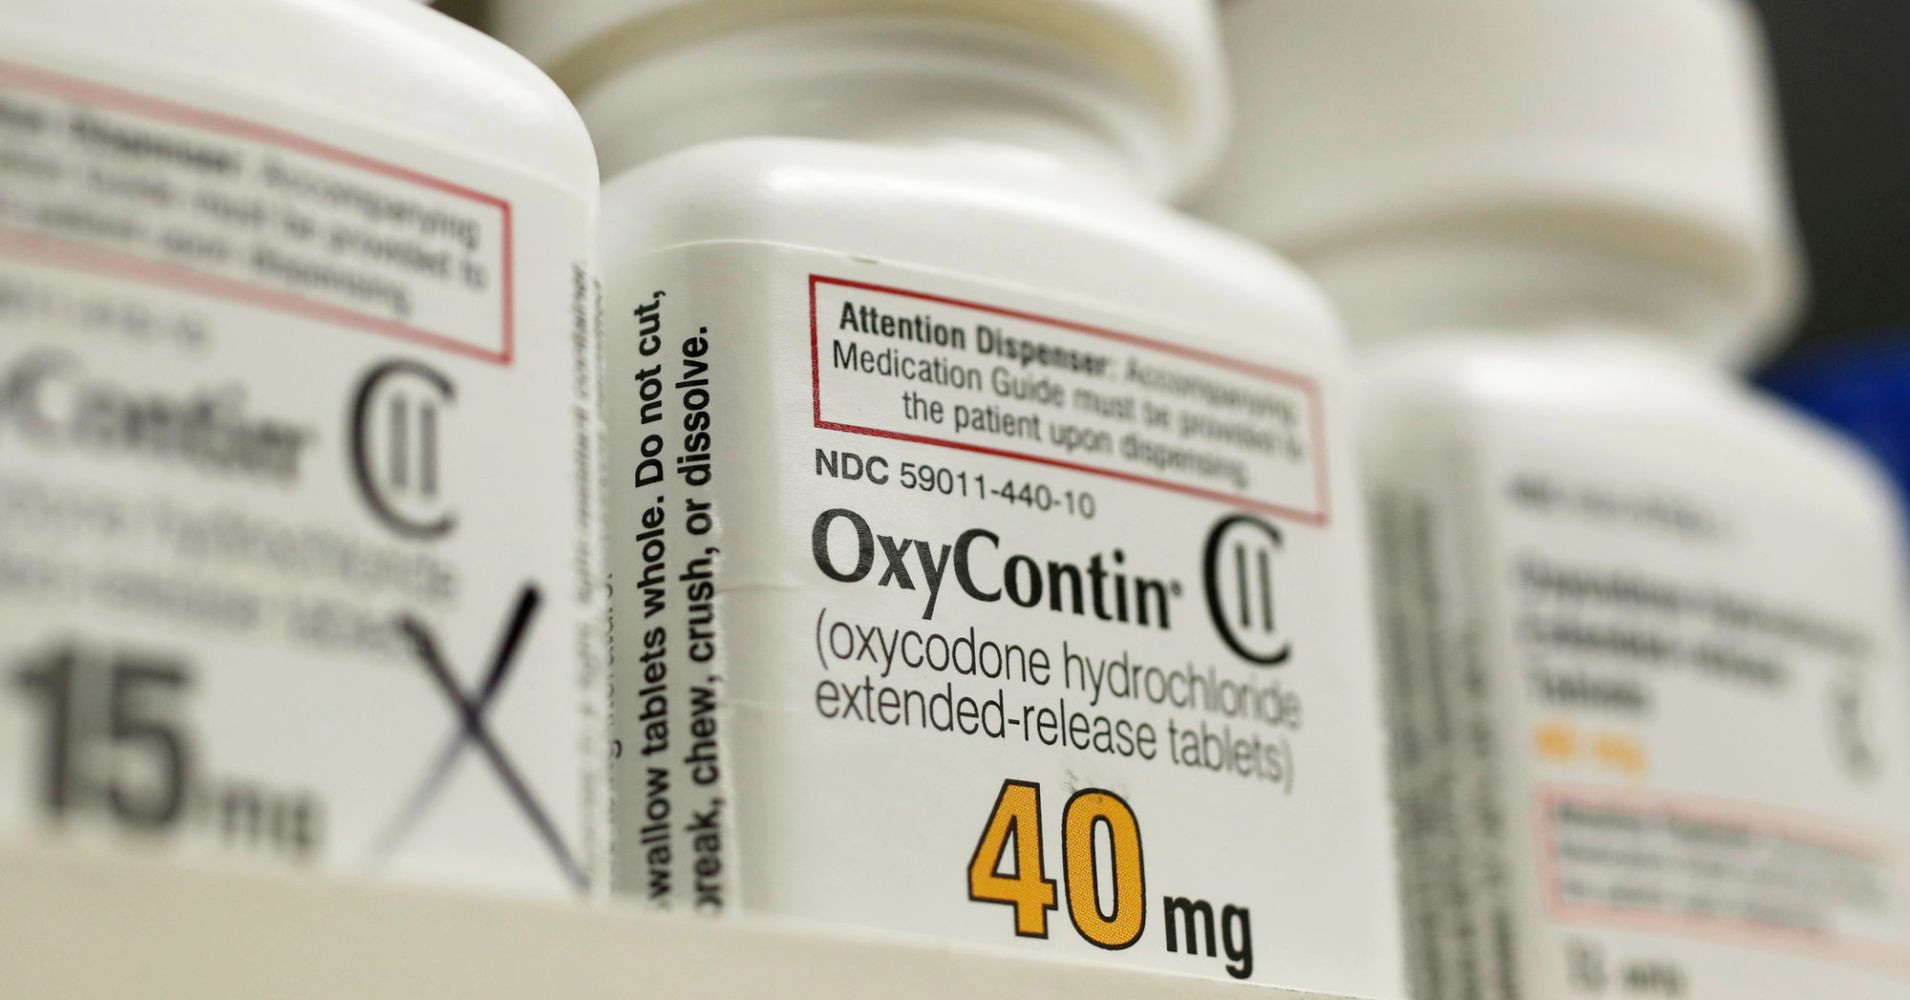 Bottles of prescription painkiller OxyContin made by Purdue Pharma LP sit on a shelf at a local pharmacy in Provo, Utah, April 25, 2017.